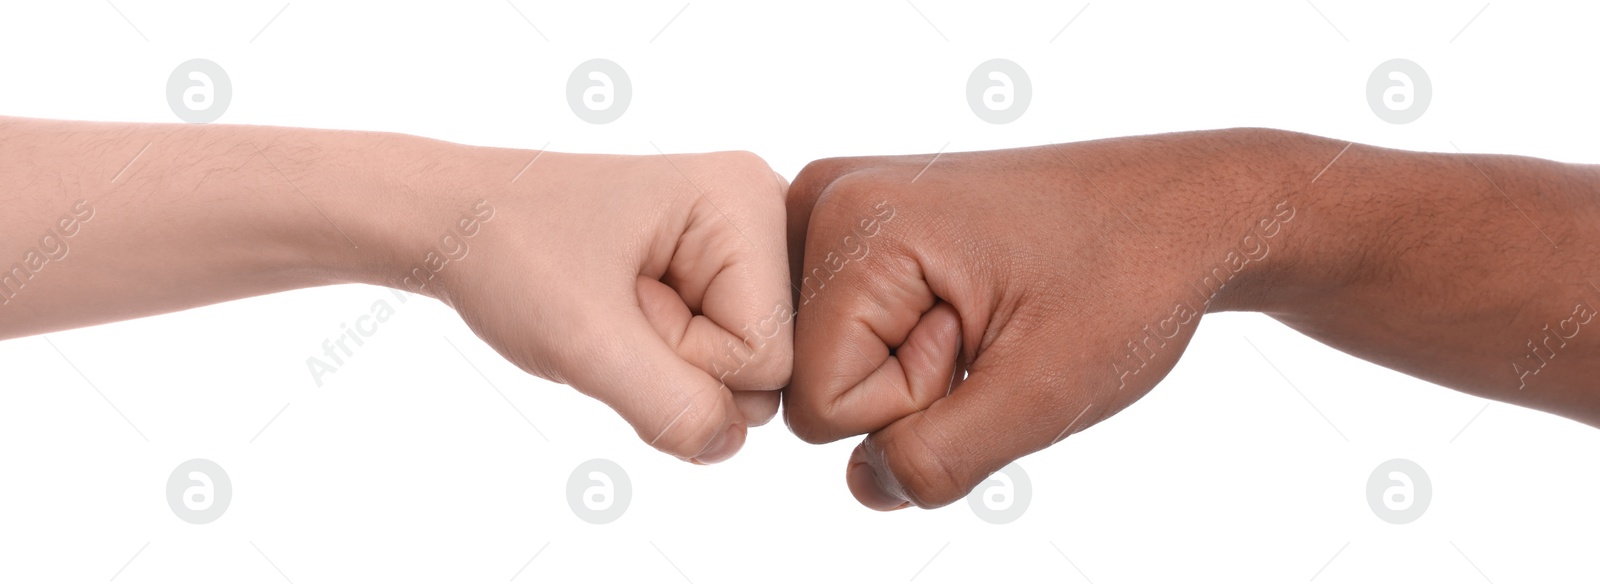 Photo of International relationships. People making fist bump on white background, closeup